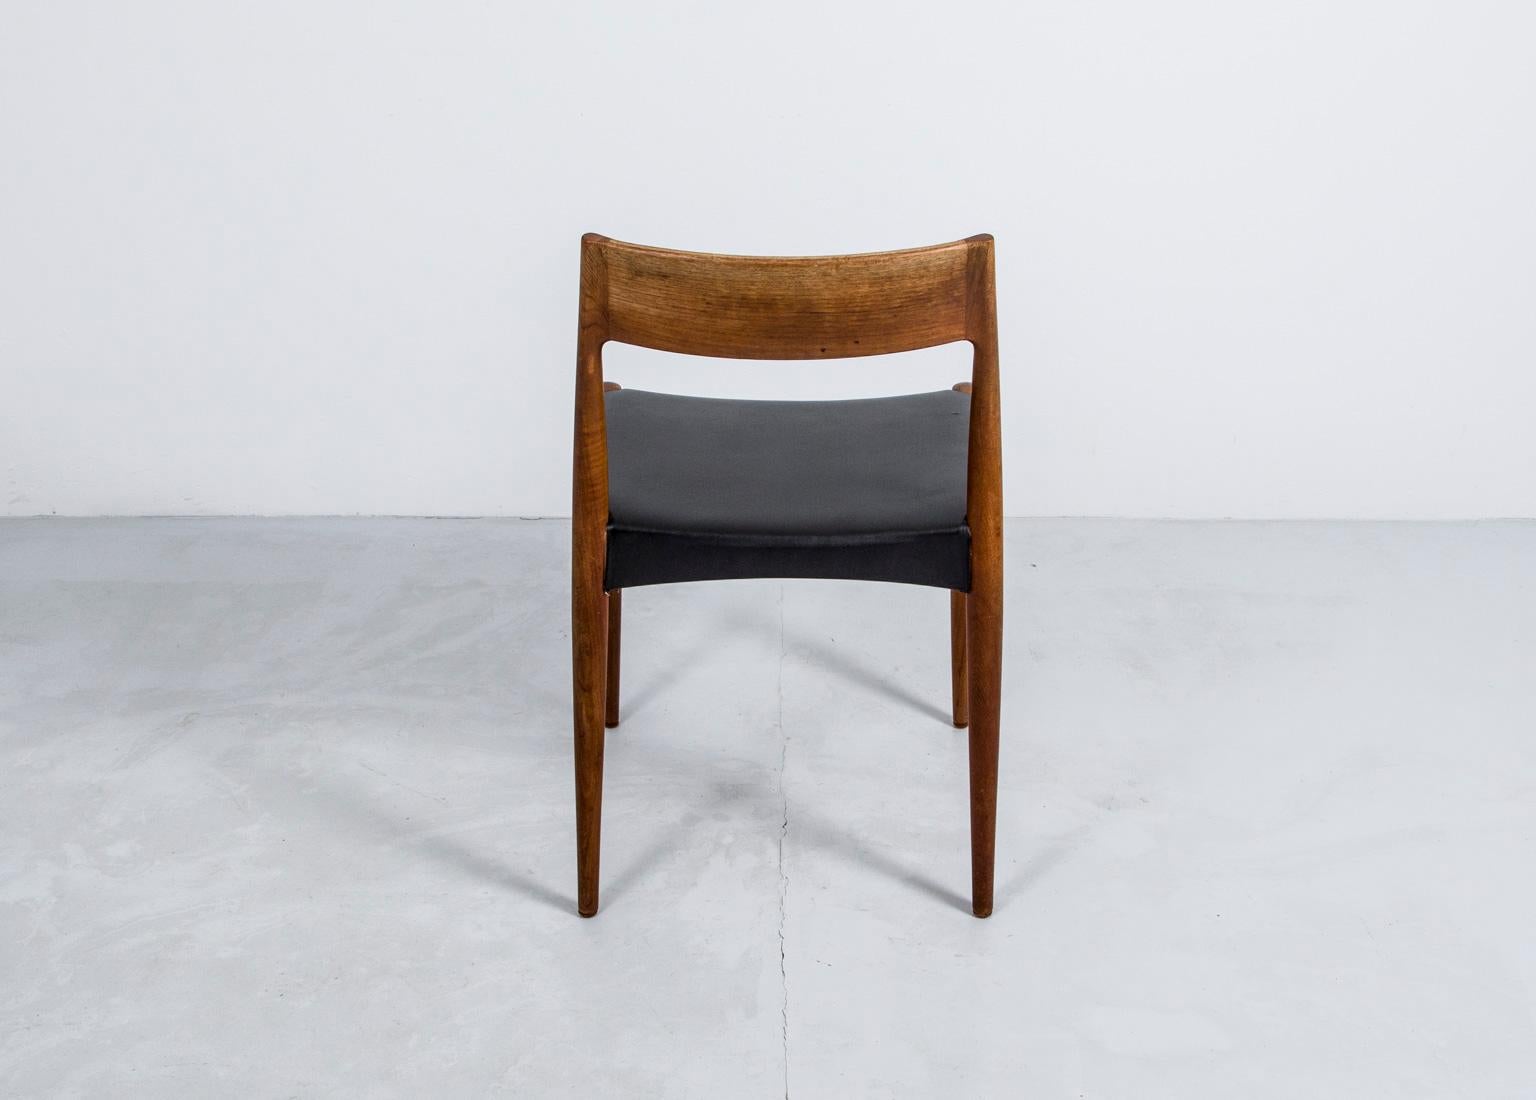 Teak Chair No. 77 by Niels Moller for Moller Models Denmark, 1960s In Good Condition For Sale In Zurich, CH